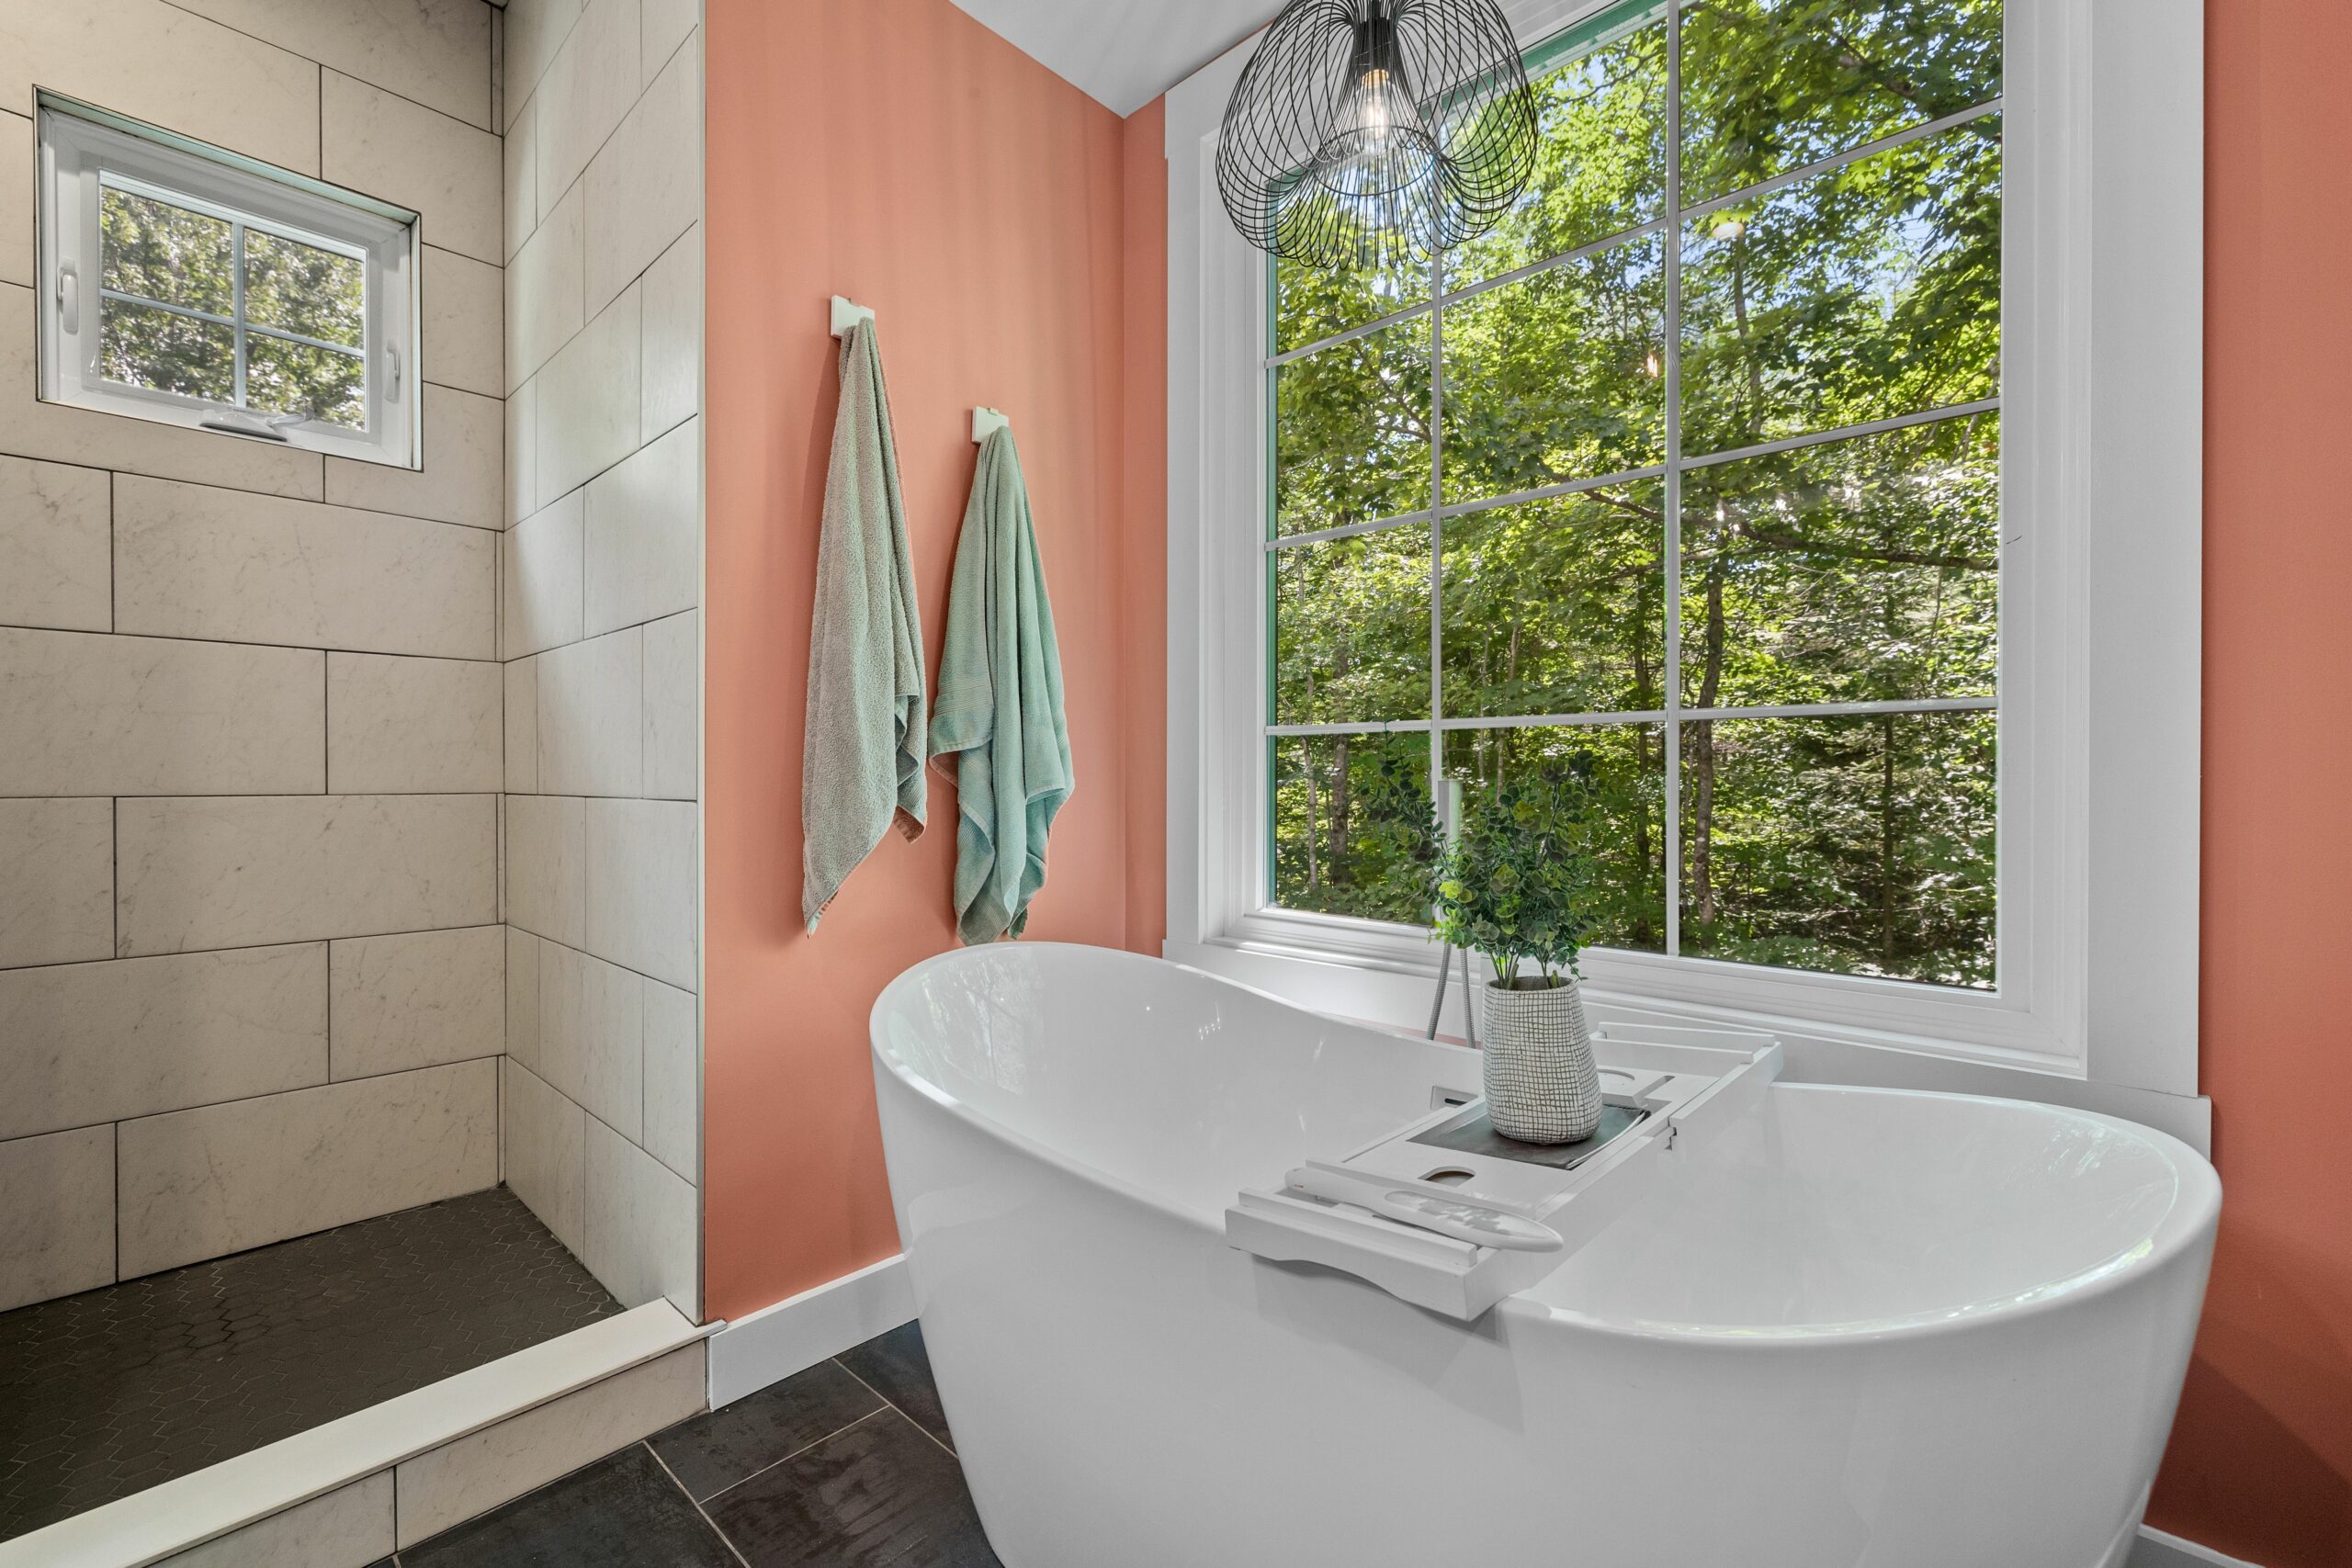 3 Ideas for a Colorful Bathroom Renovation